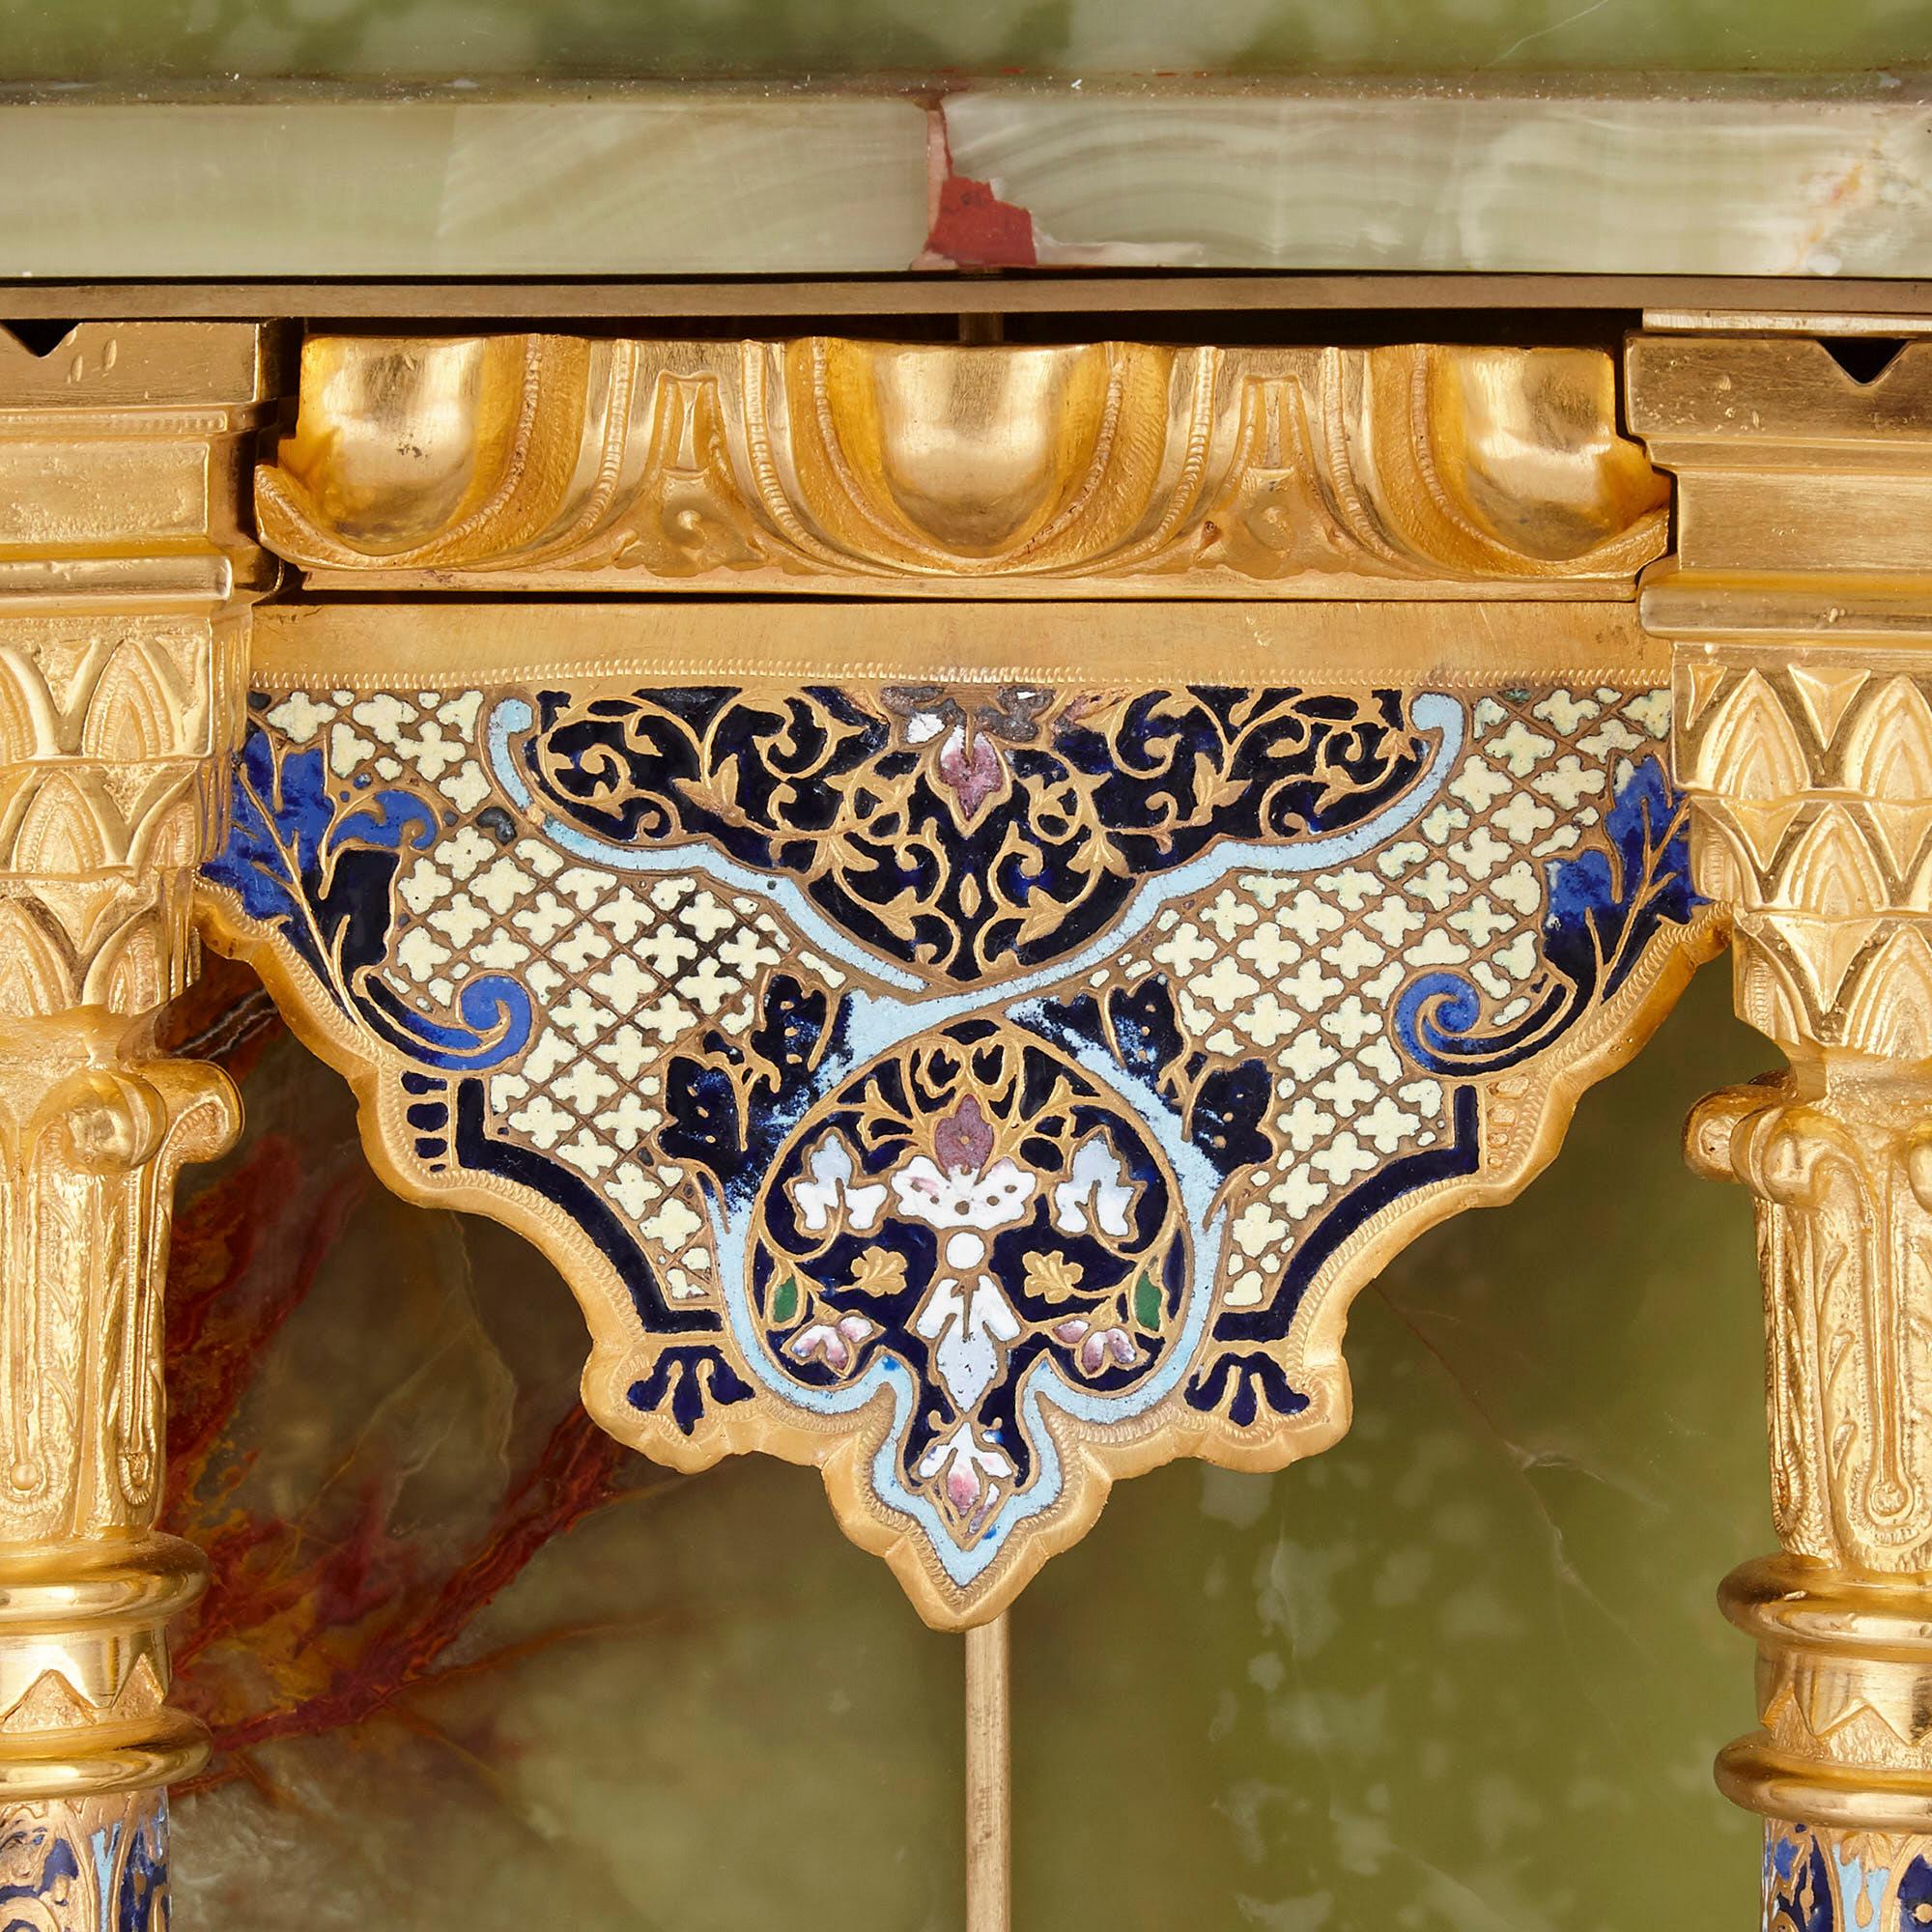 19th Century French Neoclassical Style Enamel, Onyx, and Gilt Bronze Pedestal Clock For Sale